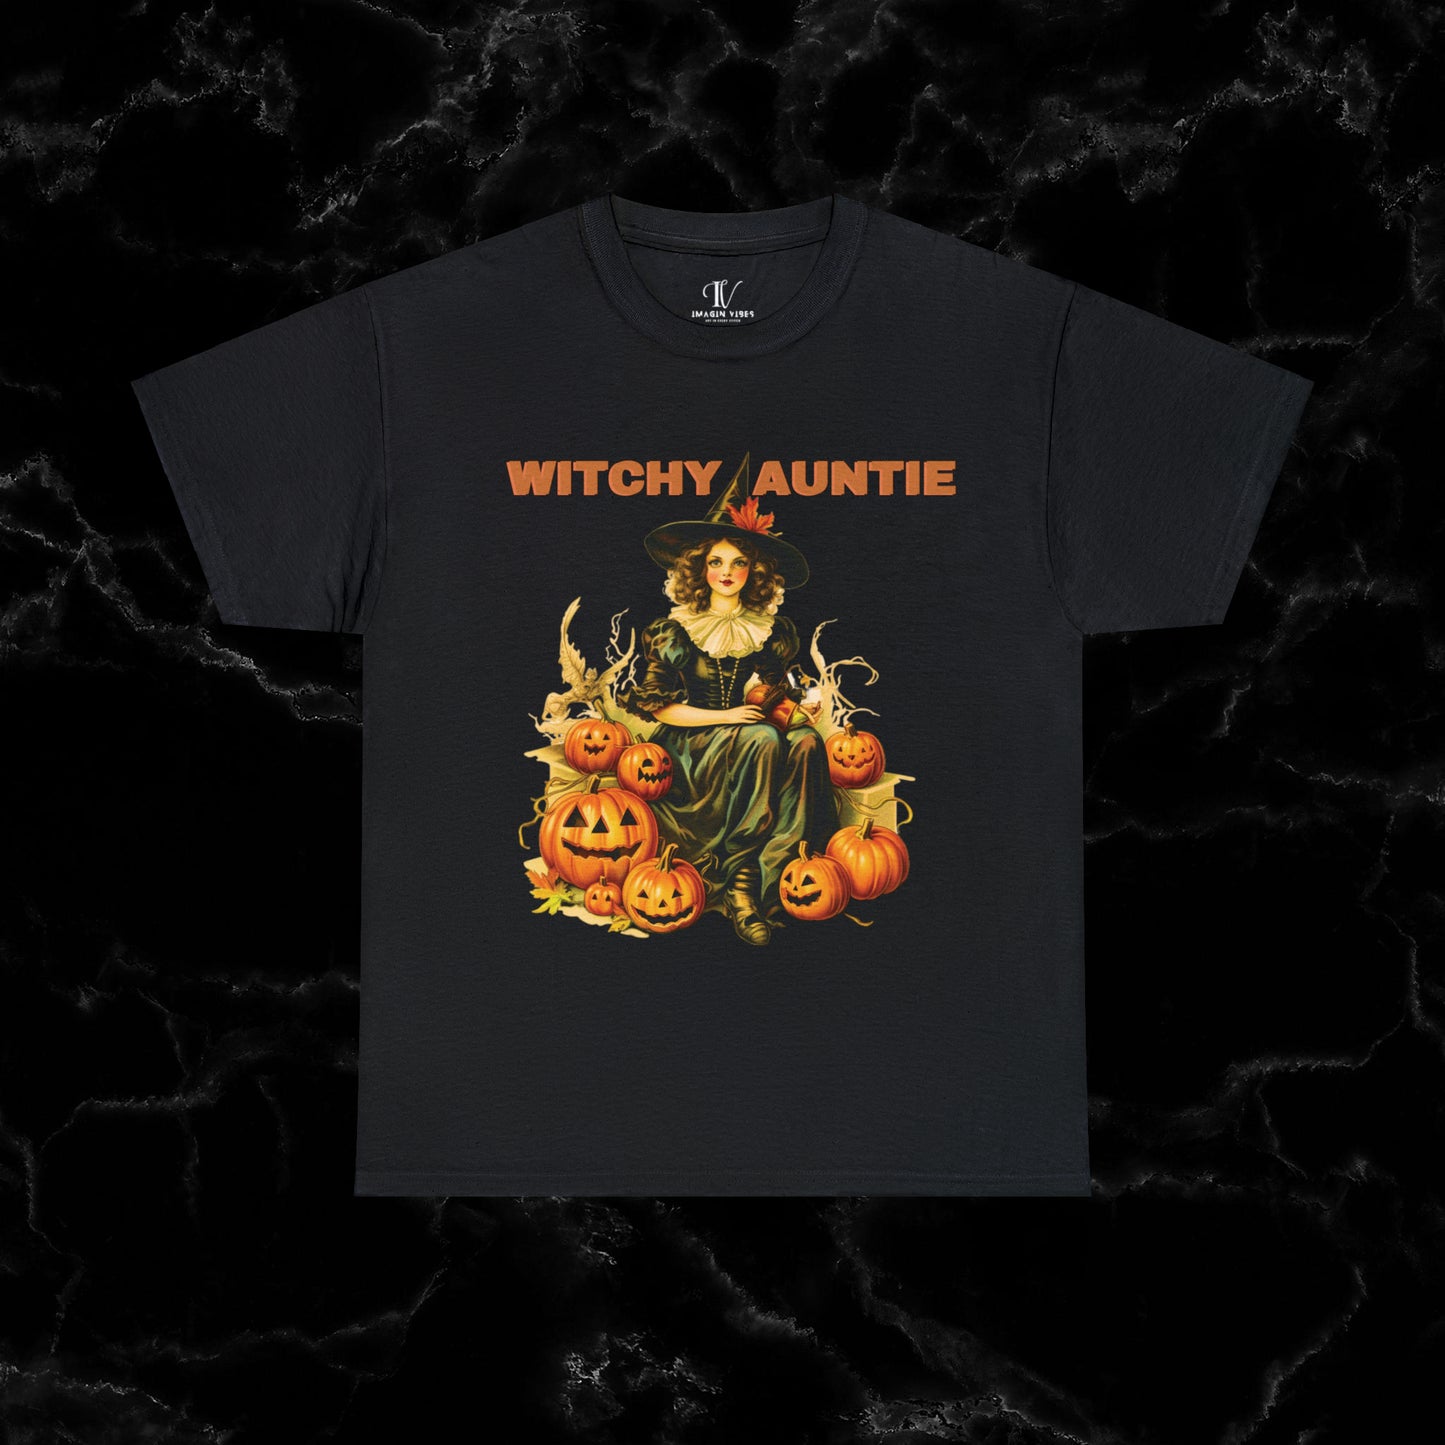 Witchy Auntie Cotton T-Shirt - Cool Aunt, Aunt Halloween, Perfect Gift for Aunts T-Shirt Black S 